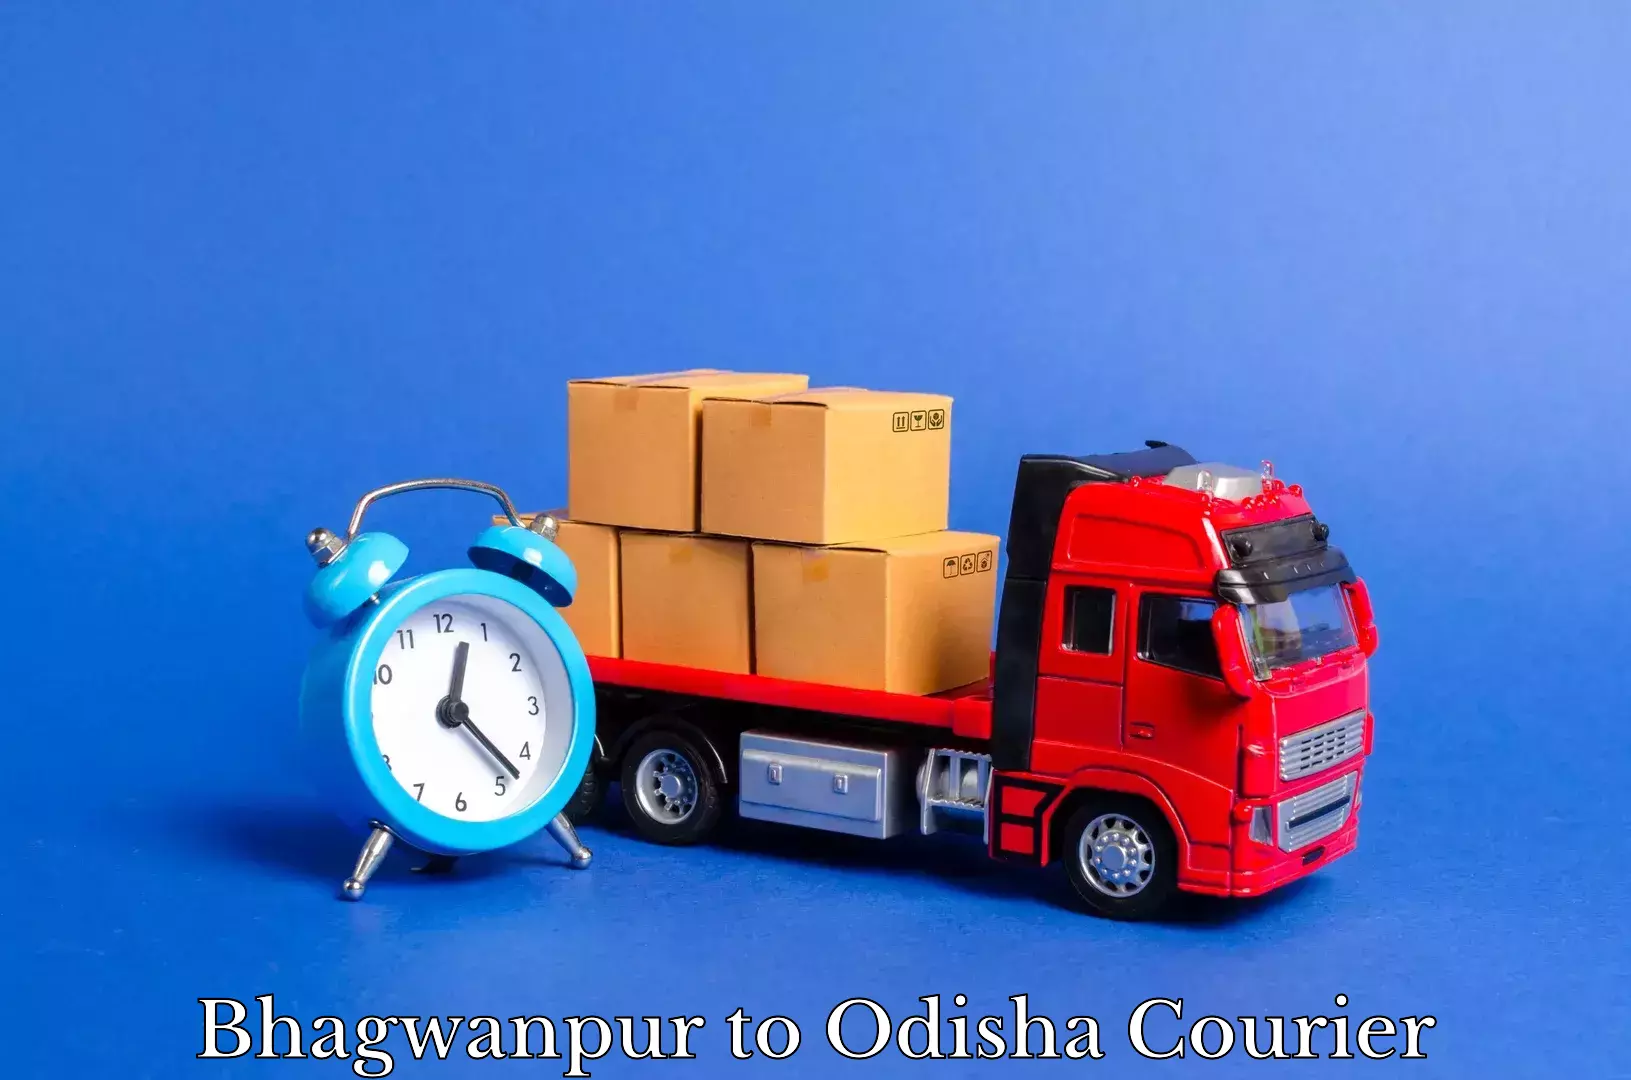 Comprehensive relocation services Bhagwanpur to Dhamanagar